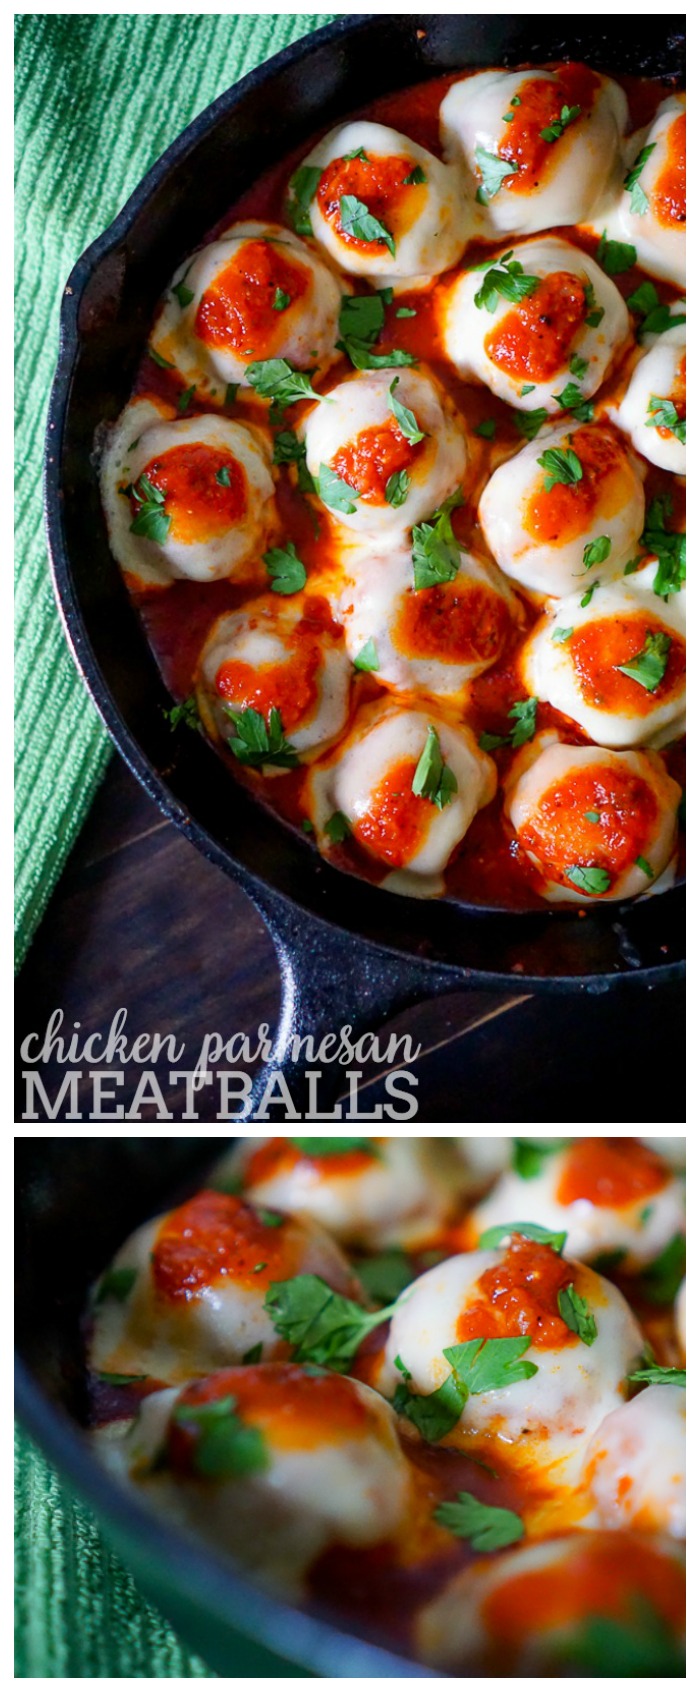 Chicken Parmesan Meatballs - Makes a hearty appetizer as well as an easy dinner idea served over pasta! | The Love Nerds #as